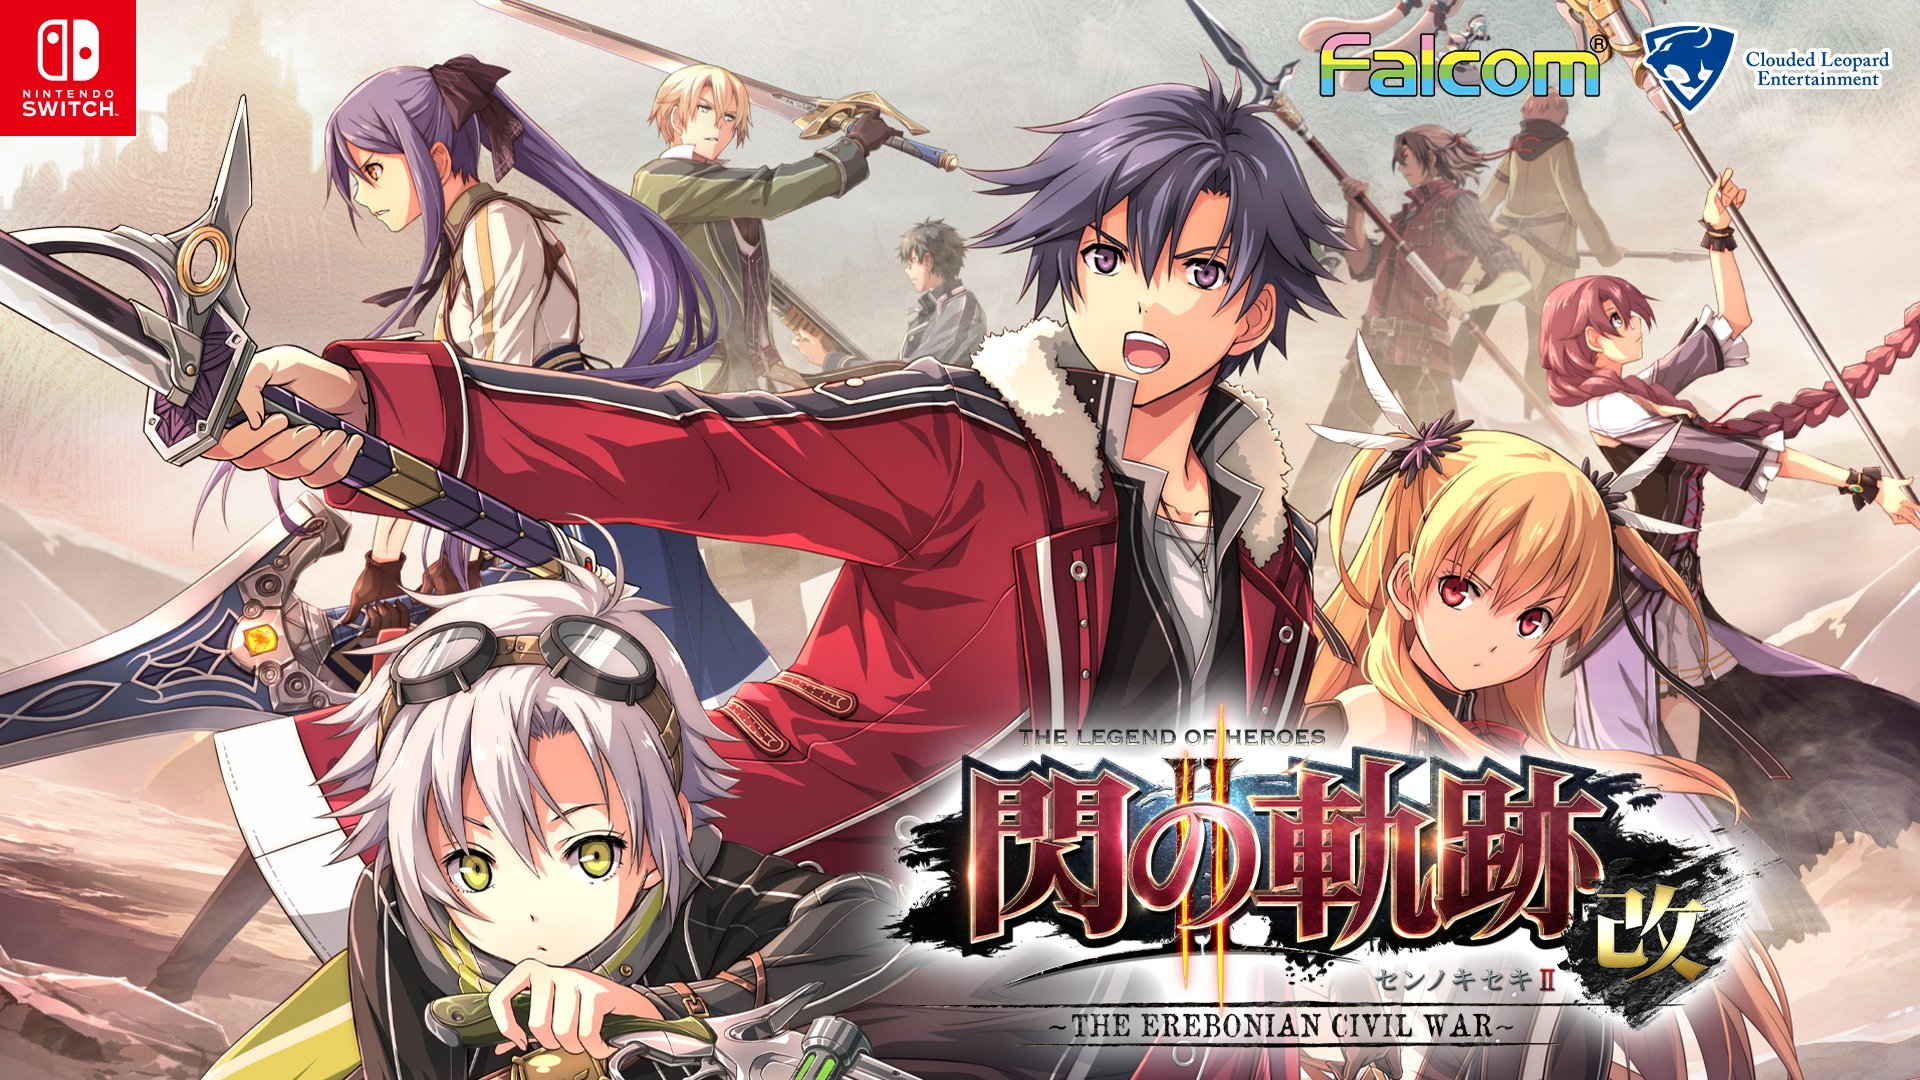 instal the last version for android The Legend of Heroes: Trails from Zero